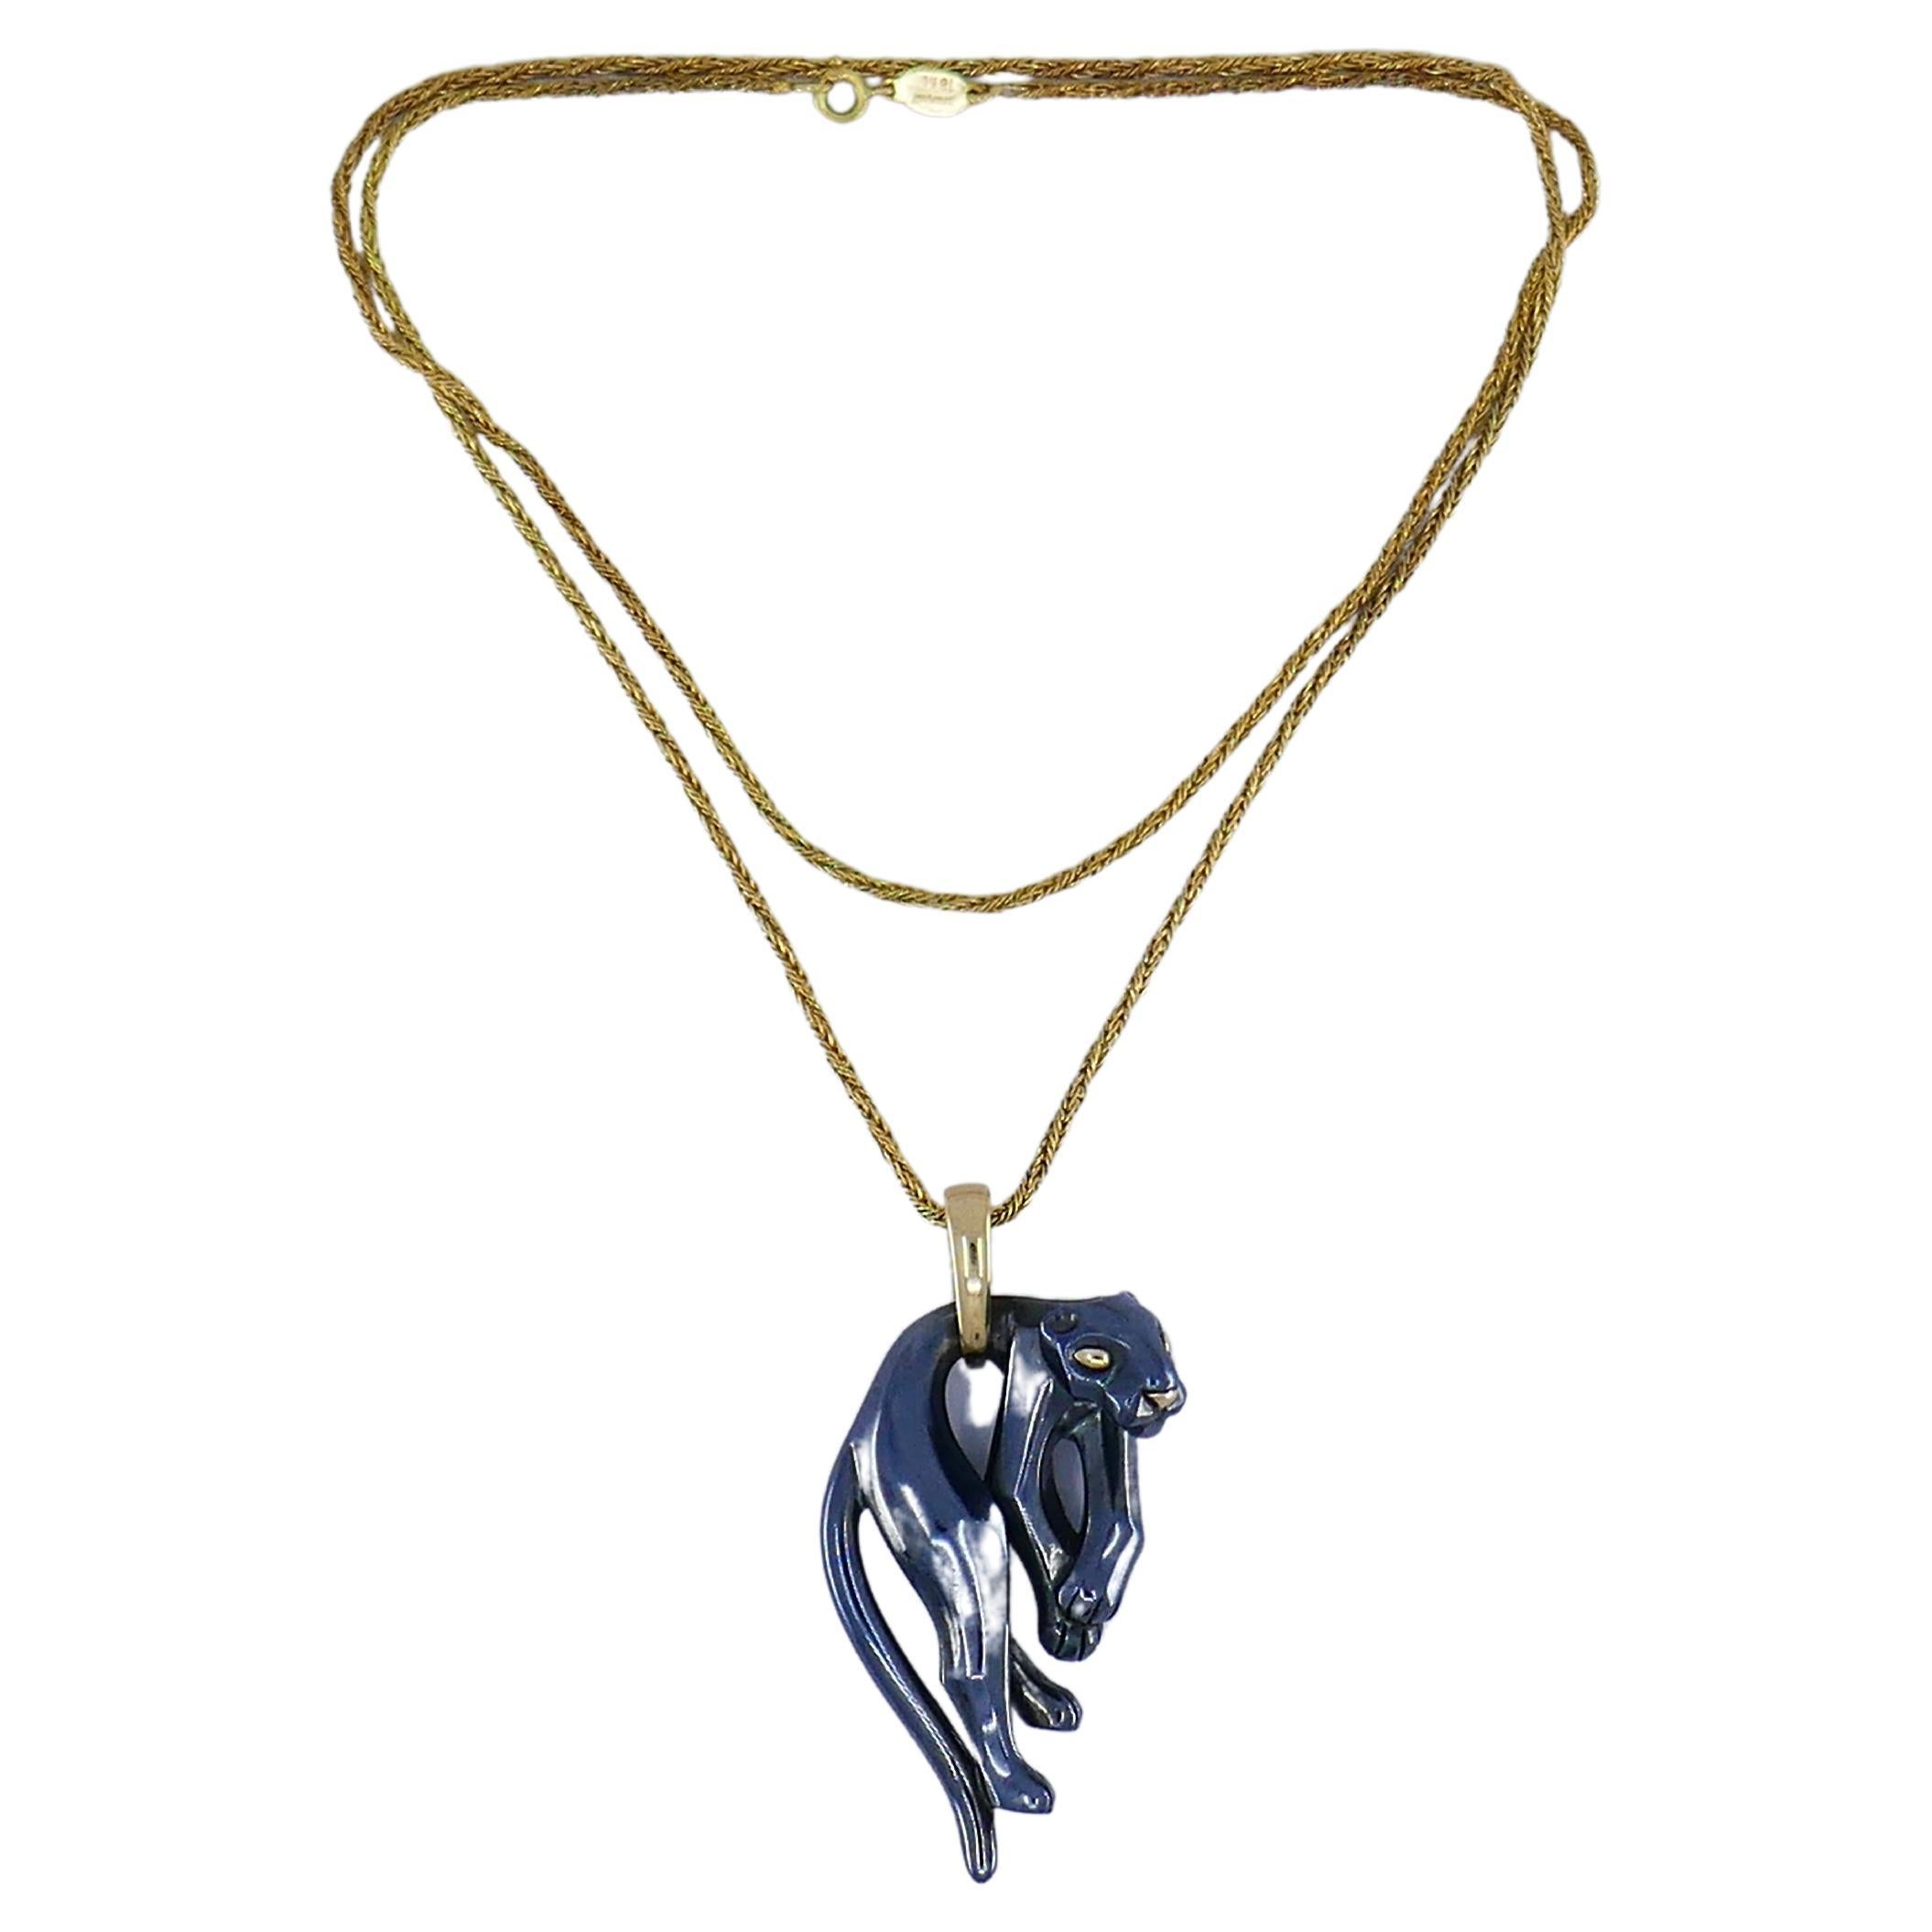 An iconic Cartier hanging Panthere pendant with a 18k gold Cartier chain necklace.
A sleek and daring looking cat’s figure seems relax and resting. This combo of a strong animal being in such pose creates tension and attraction.
The pendant is made